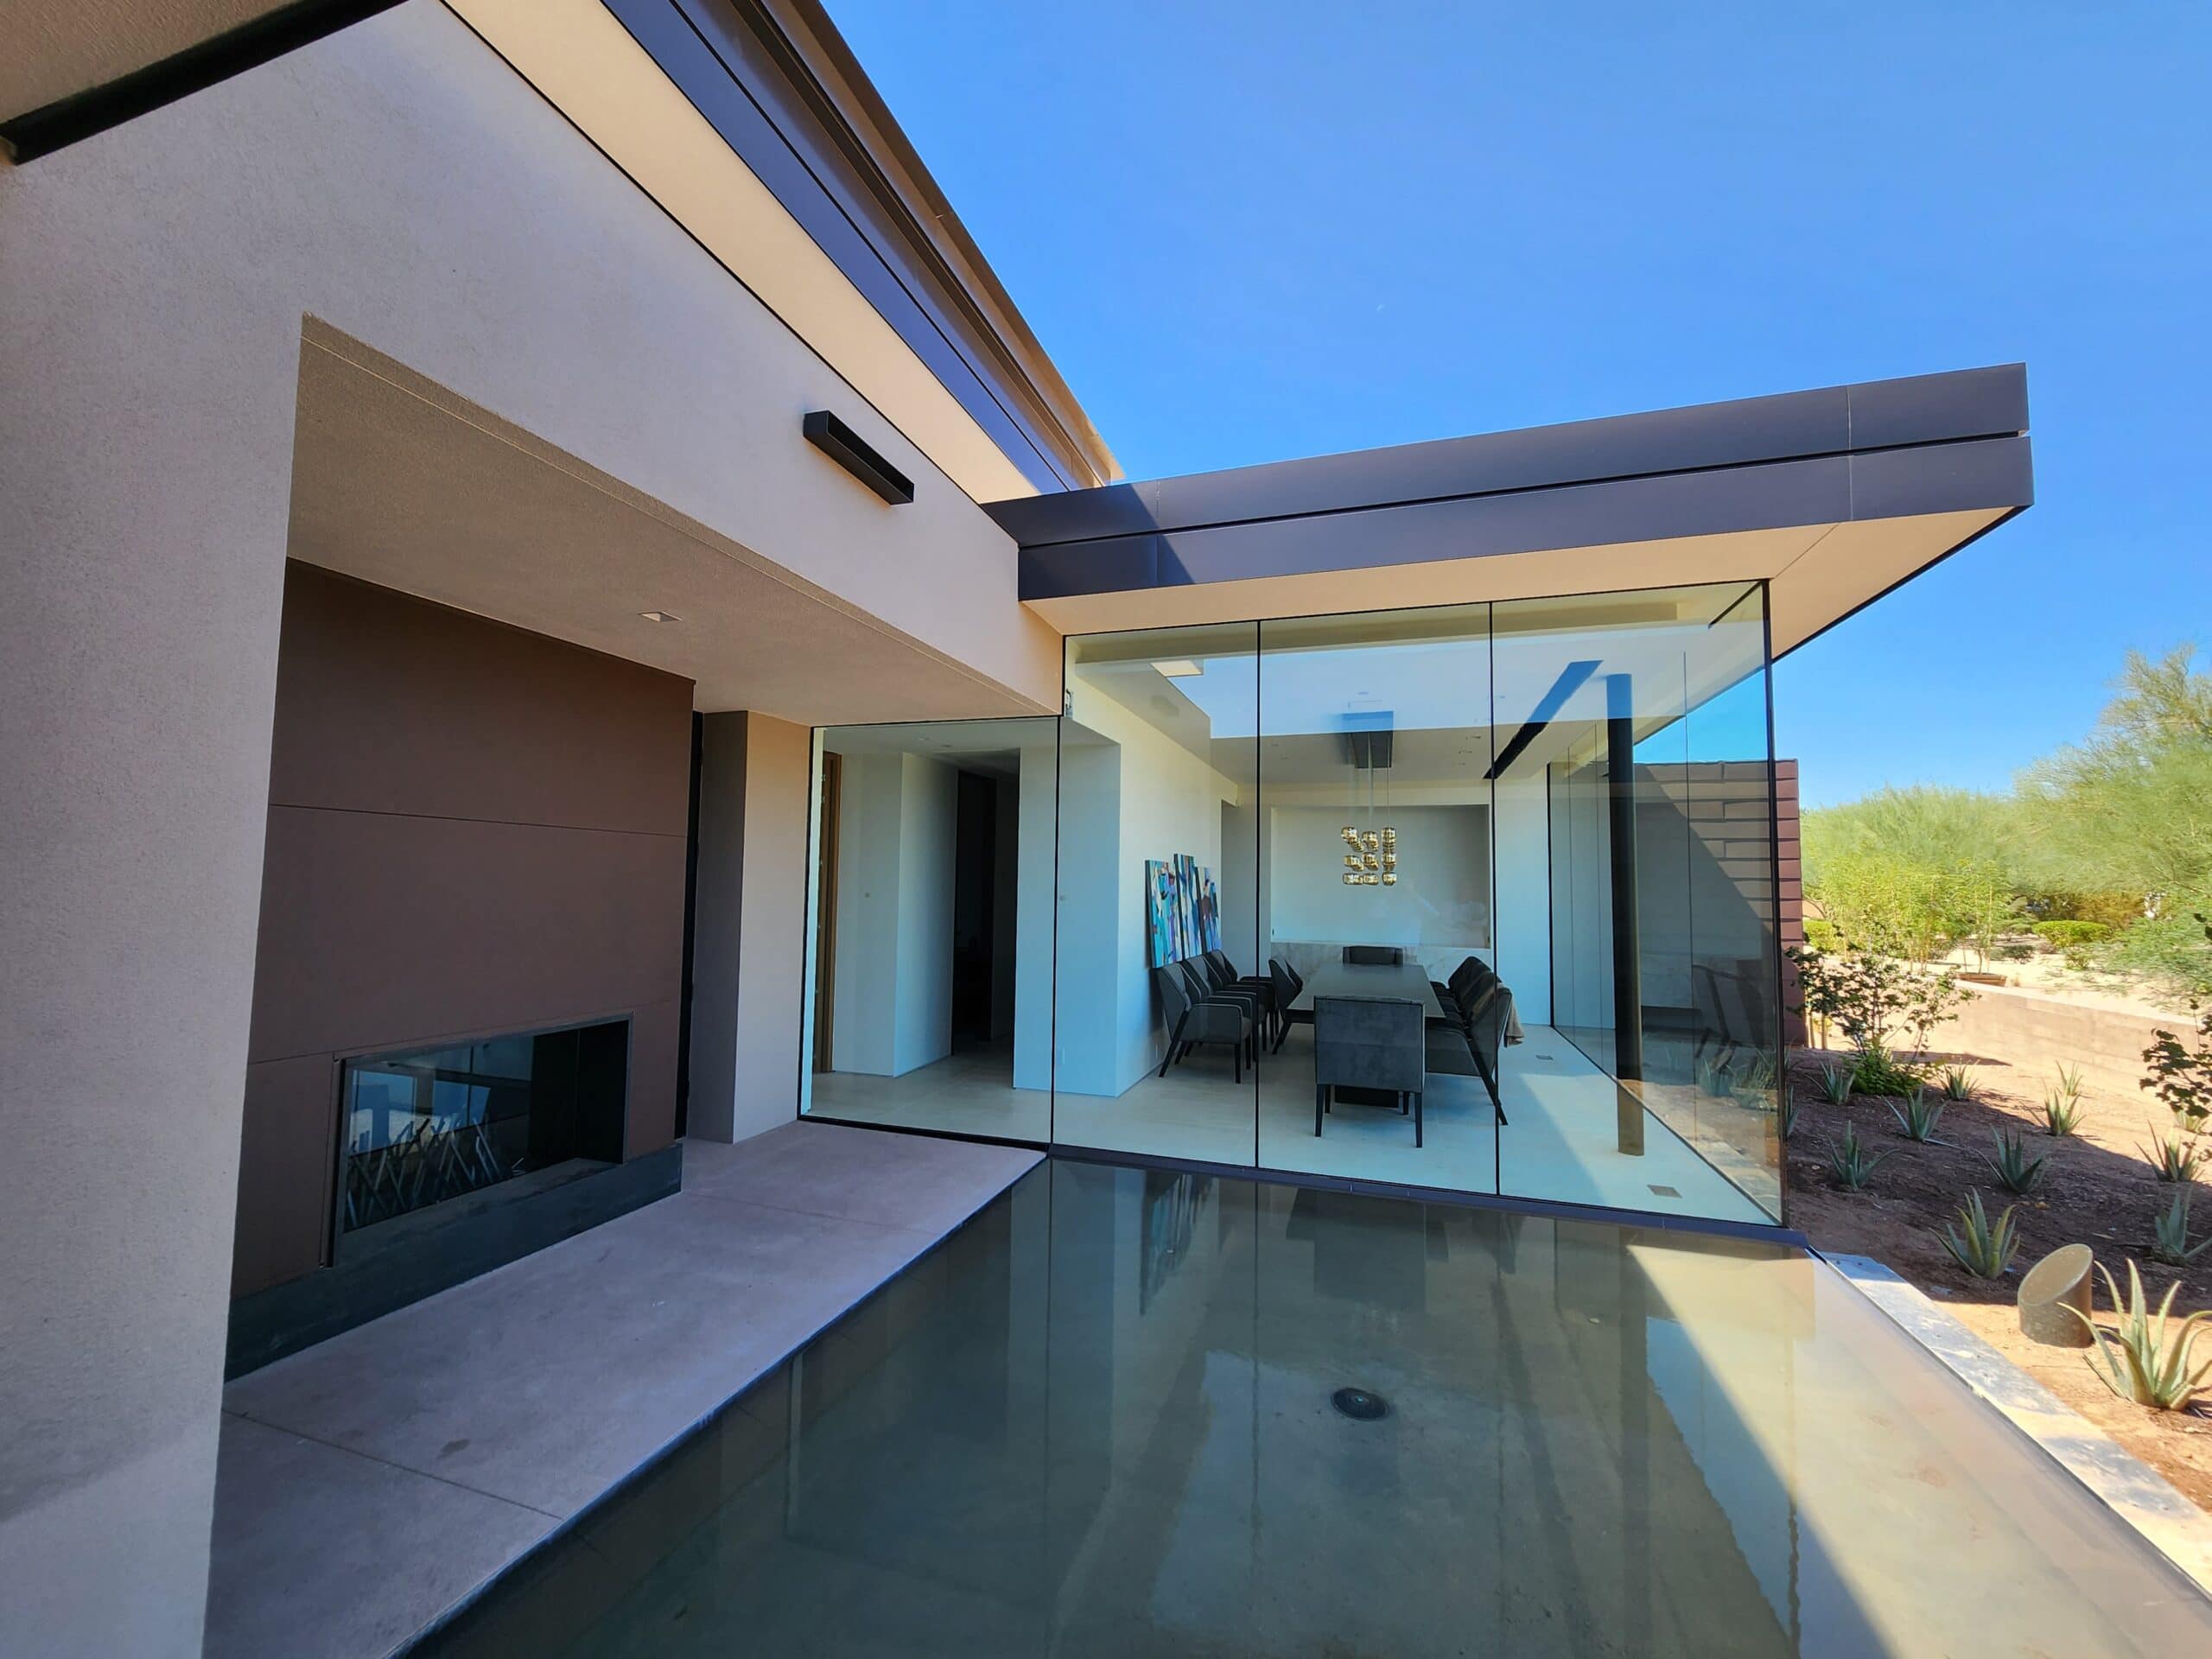 A modern home with glass walls, metal roofing, and a pool in the Biltmore area.